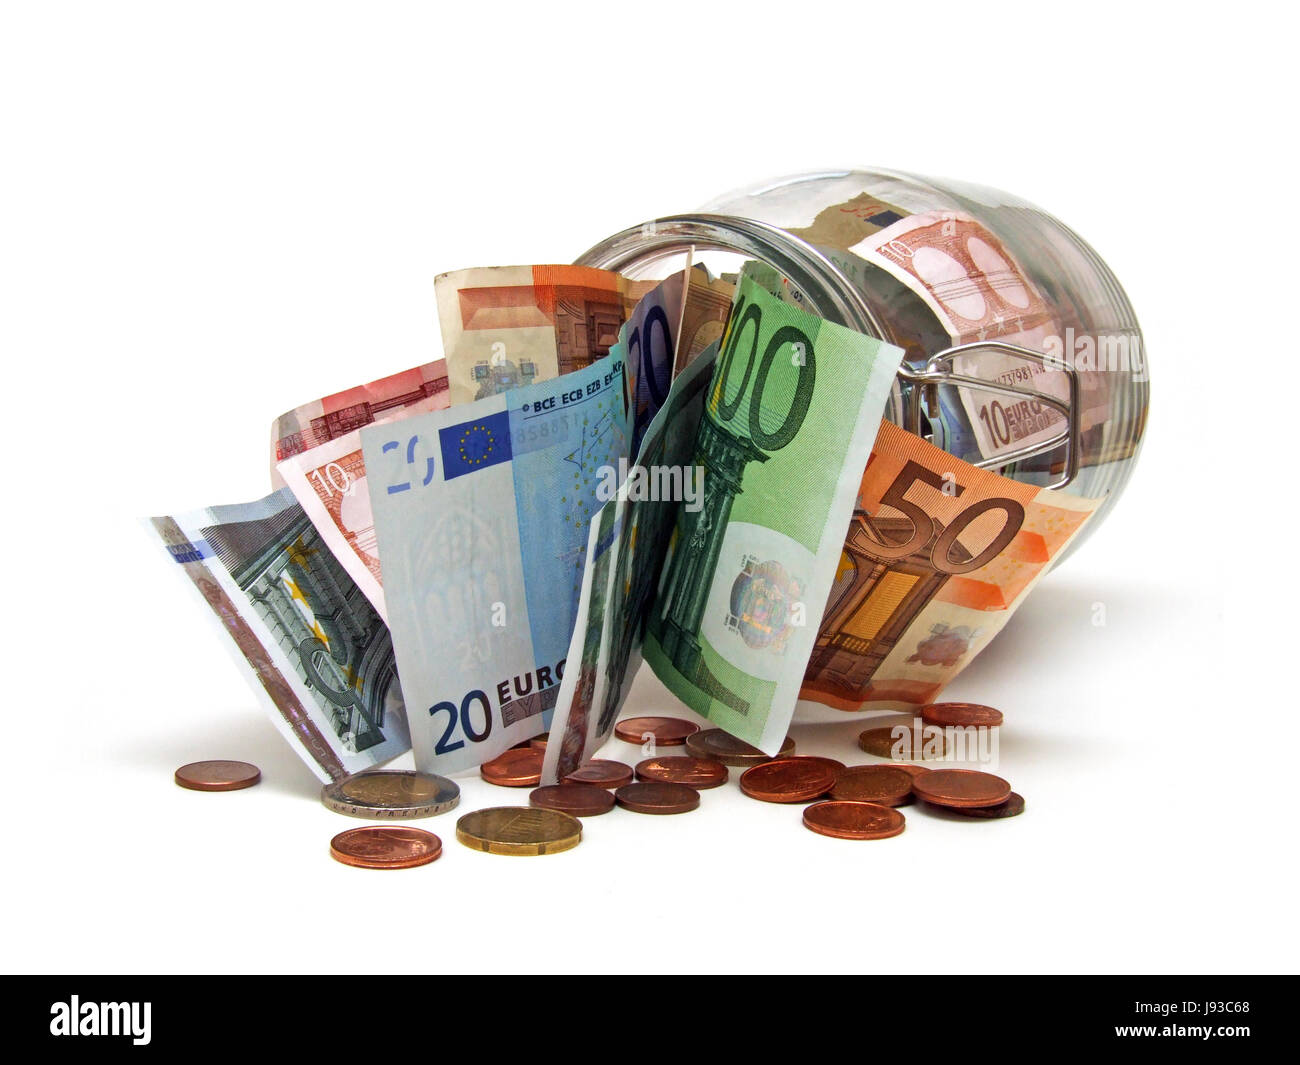 save, euro, bank notes, cents, capital, cash, cold cash, money in cash, money, Stock Photo